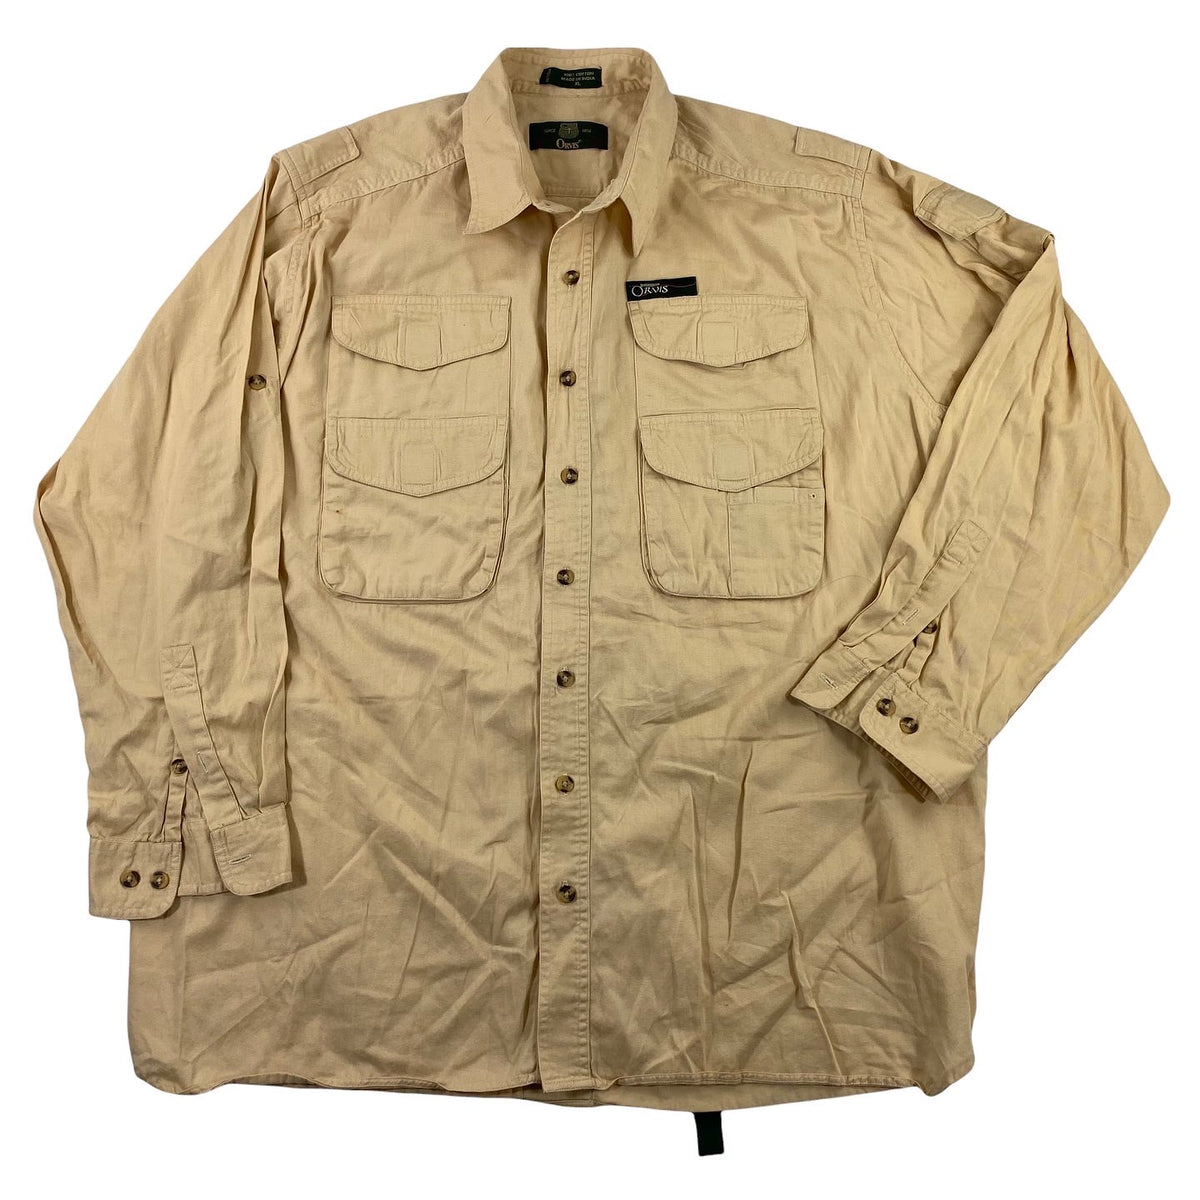 XL Orvis heavy cotton shirts - clothing & accessories - by owner